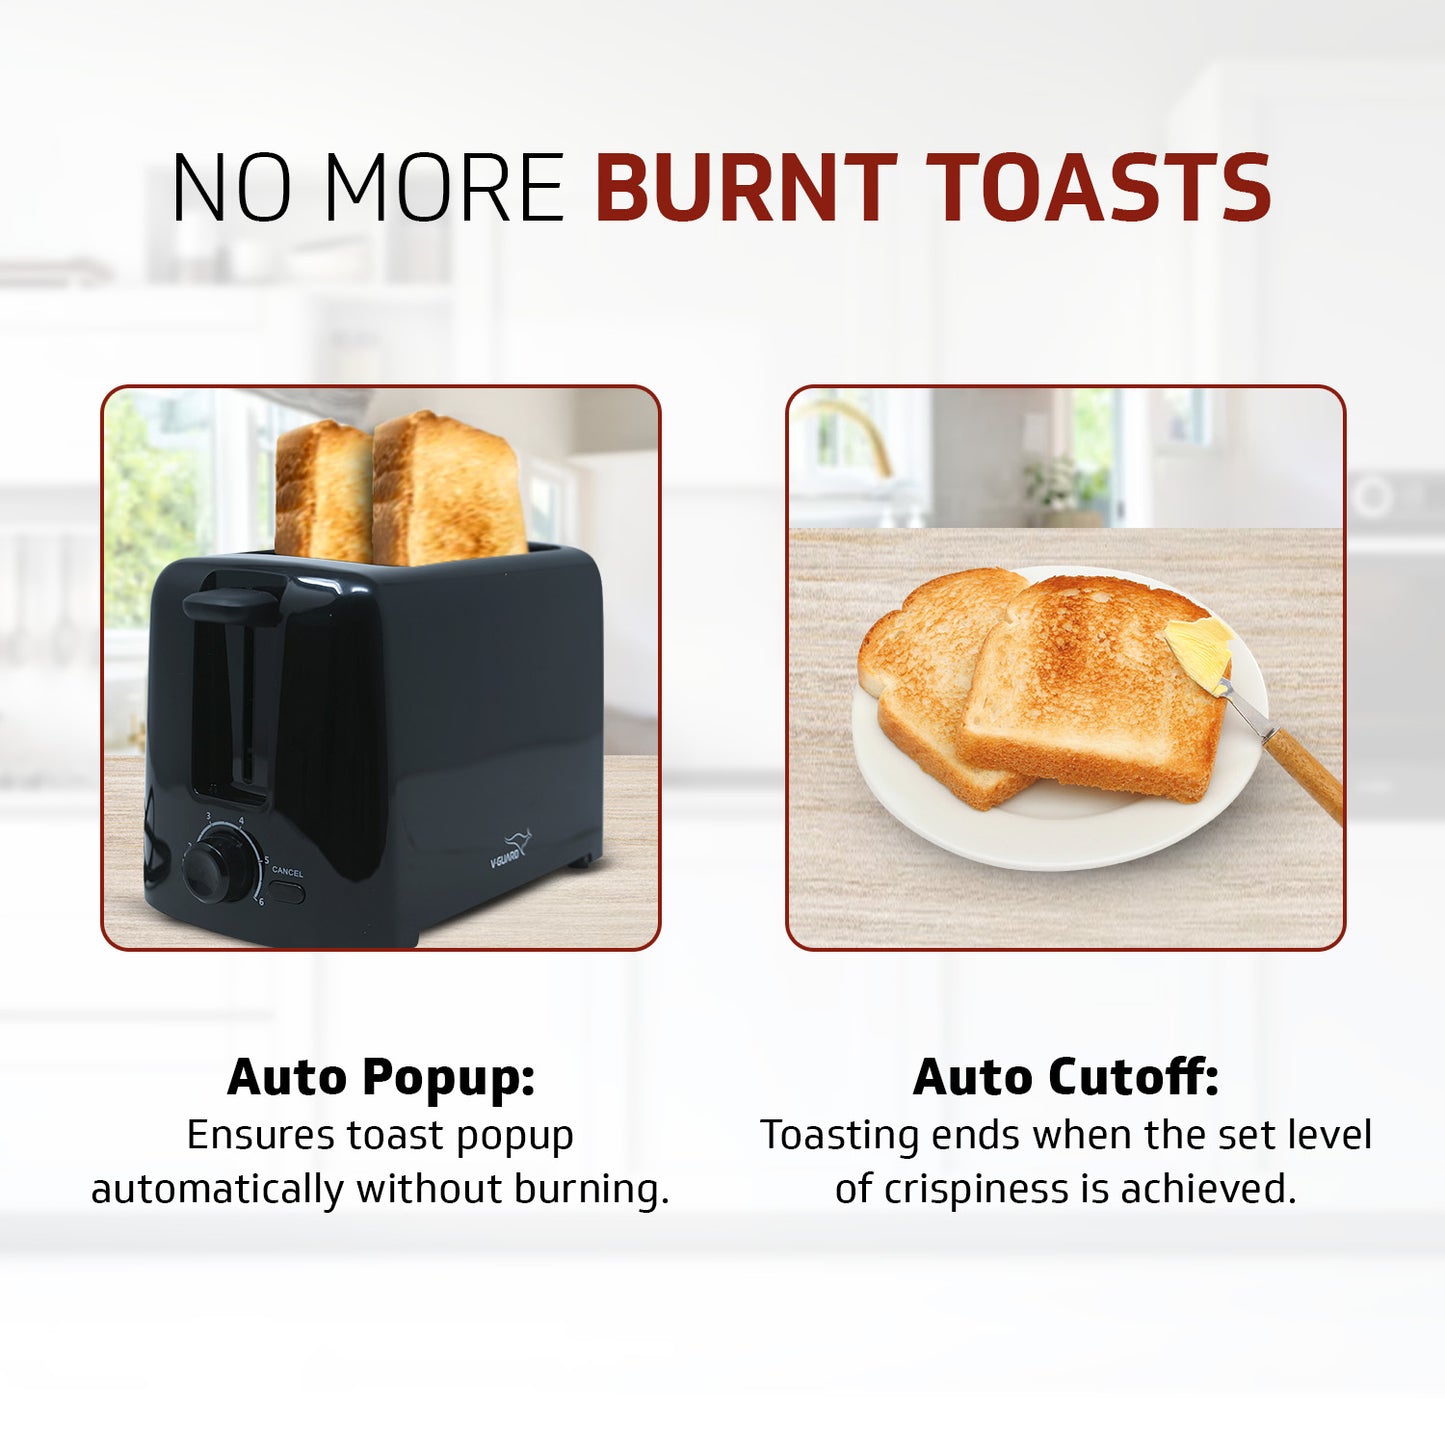 VT200 | 750 Watt Popup Toaster | 6 Browning Levels | Auto Popup Function | Auto Bread Centering